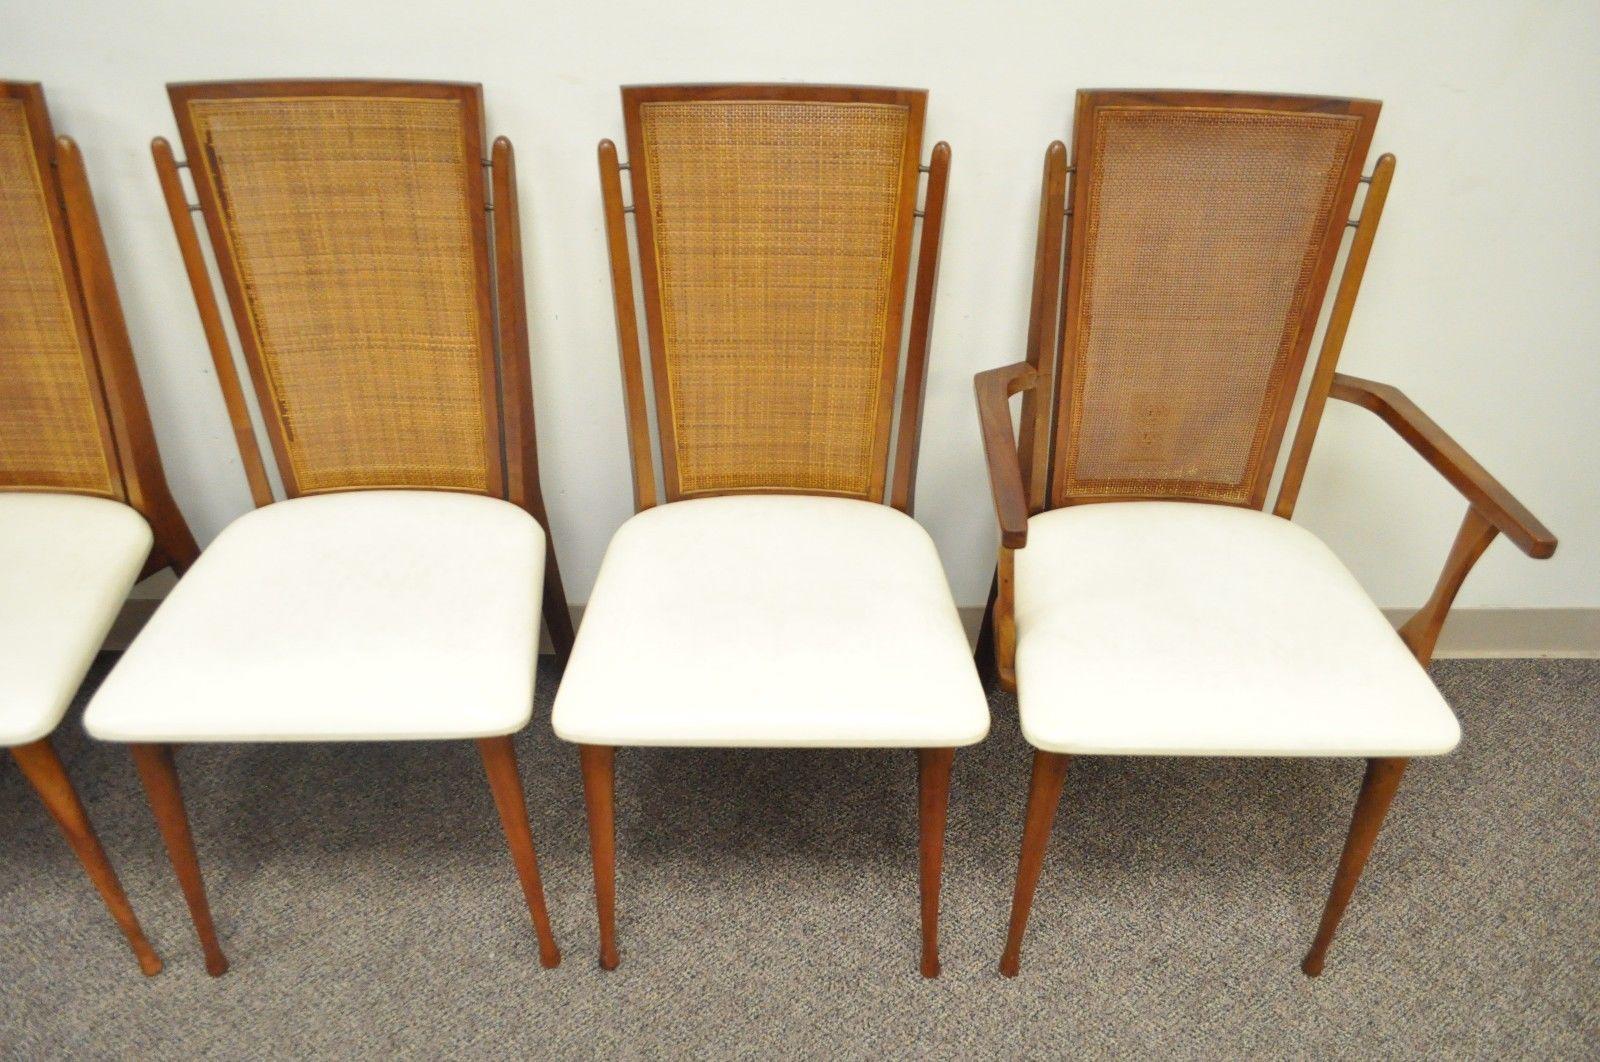 Mid-20th Century Set of Six Specialty Woodcraft Midcentury Danish Modern Cane Teak Dining Chairs For Sale